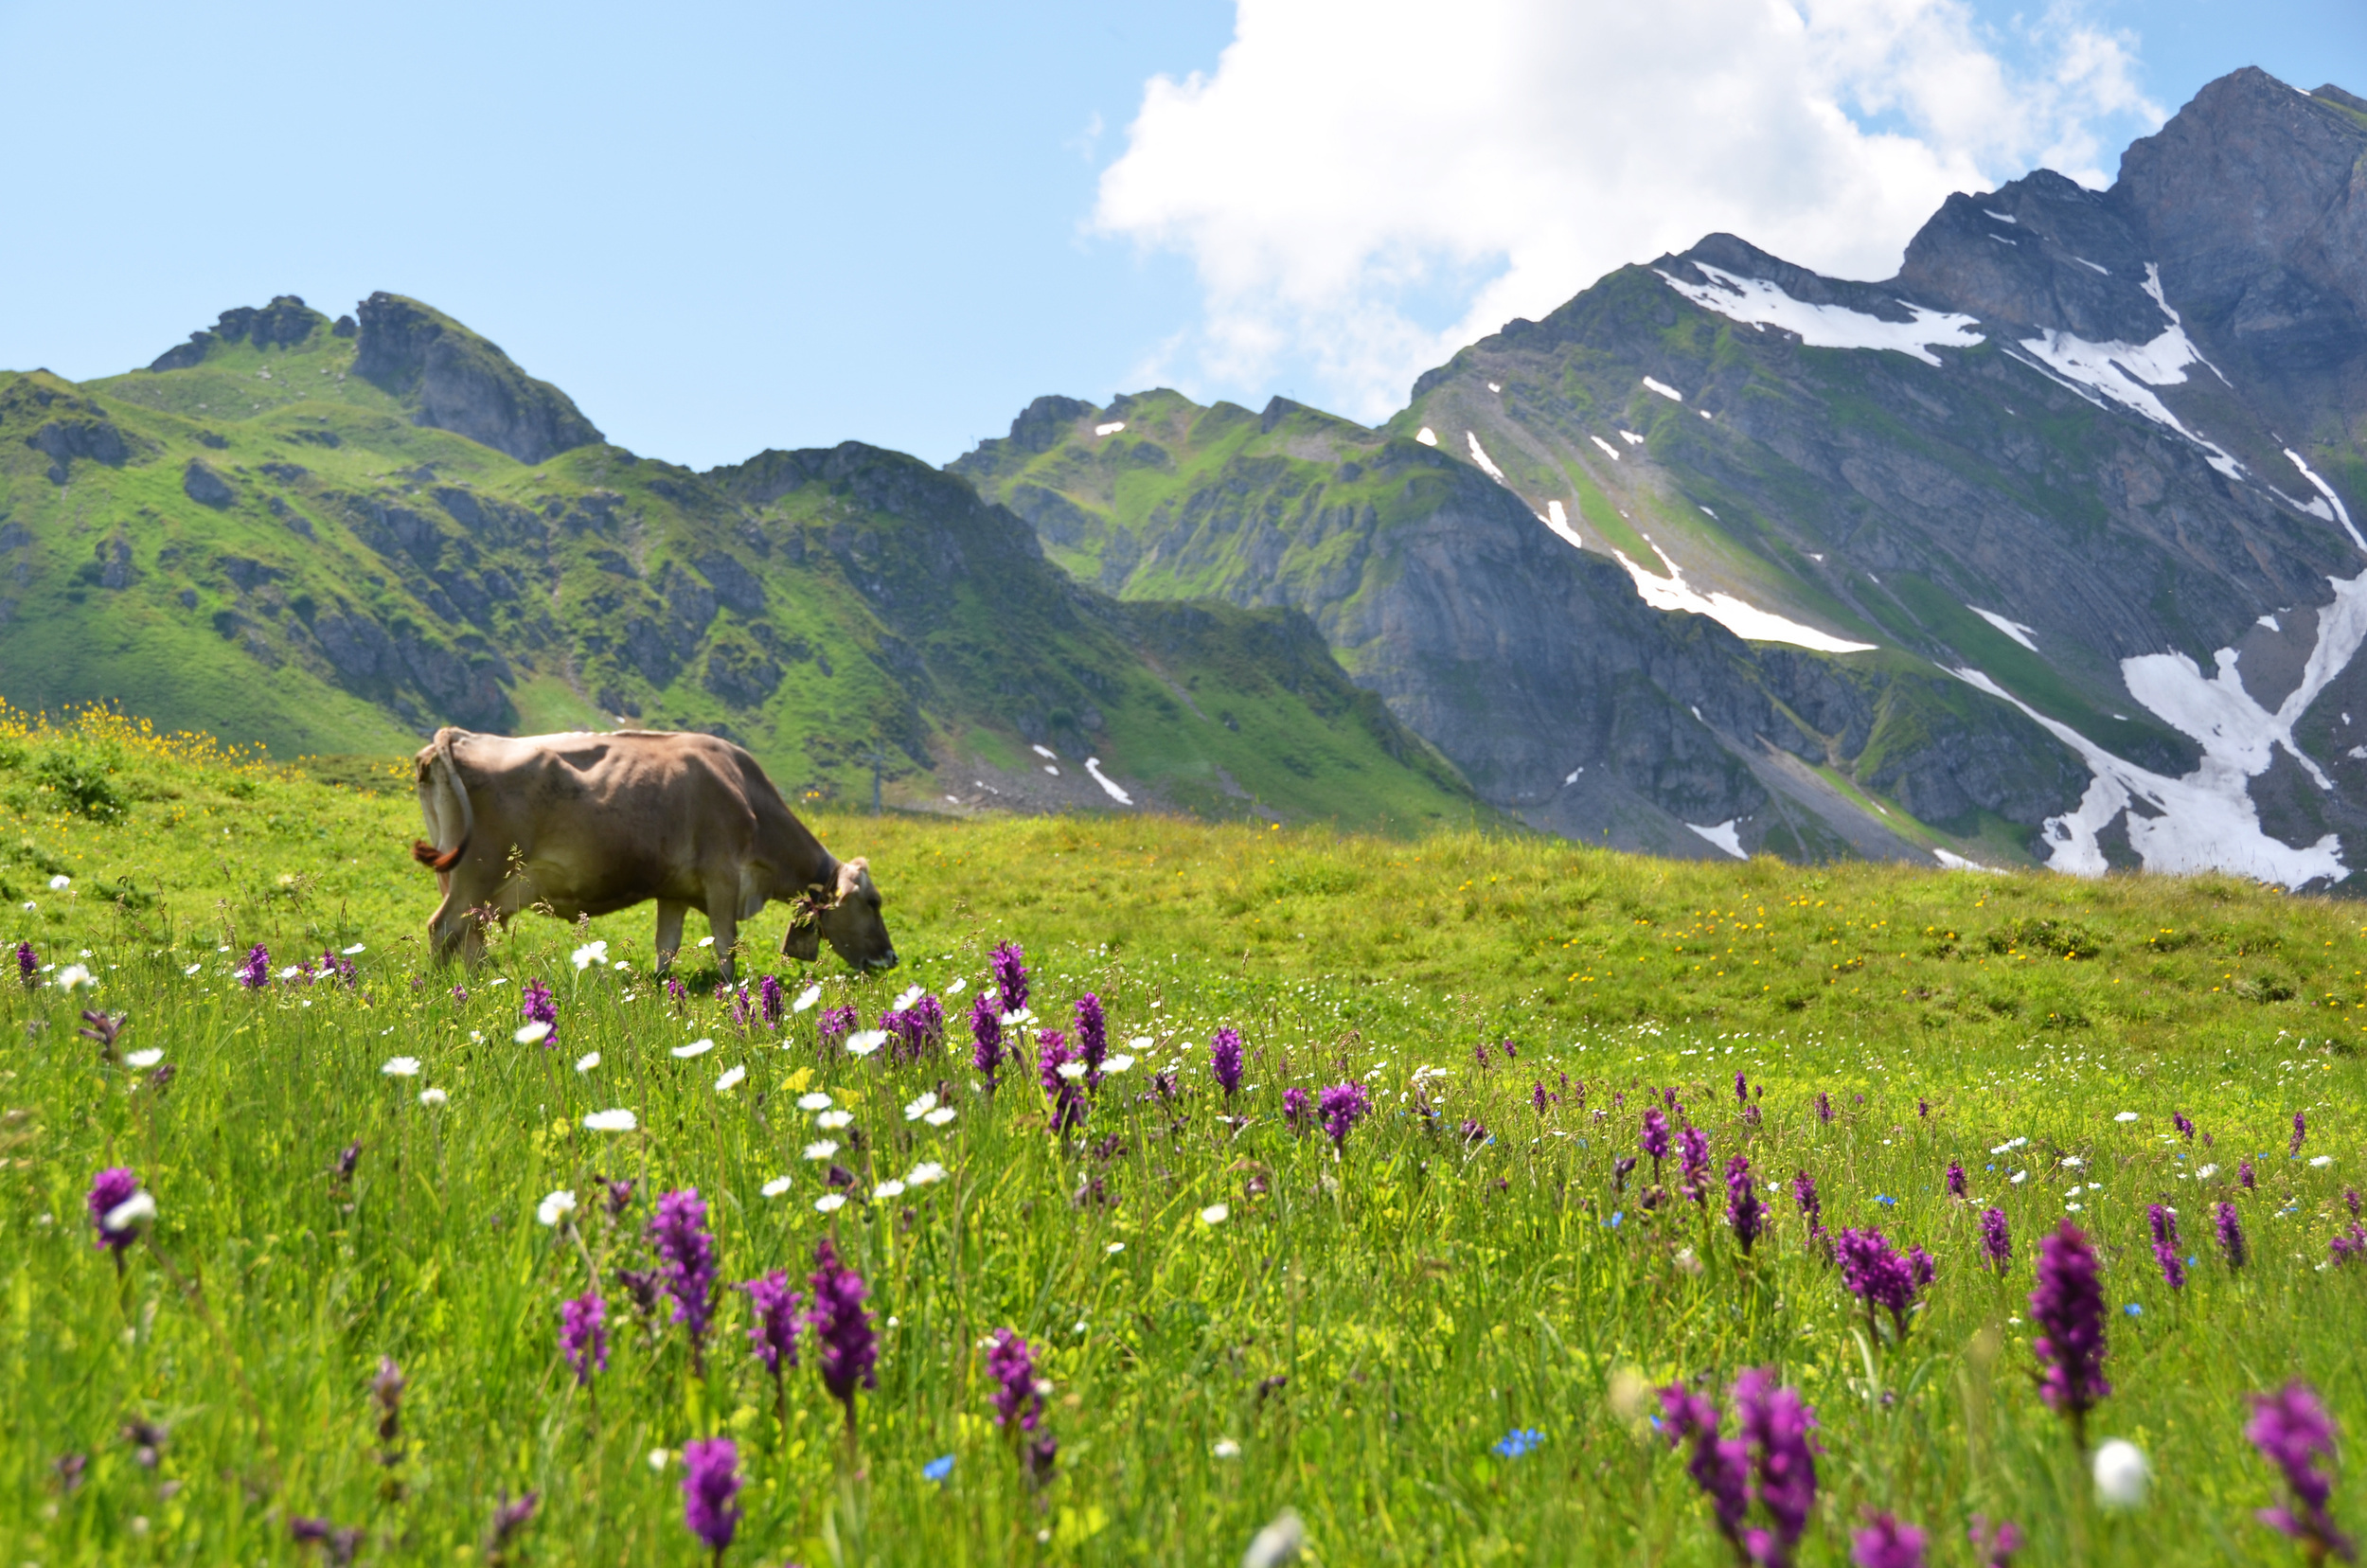 <p>Switzerland’s mountains are known as a hiking paradise, and in late spring, trekkers will be able to enjoy an explosion of wildflowers while exploring the peaks.</p><p><a href='https://www.msn.com/en-us/community/channel/vid-cj9pqbr0vn9in2b6ddcd8sfgpfq6x6utp44fssrv6mc2gtybw0us'>Follow us on MSN to see more of our exclusive lifestyle content.</a></p>